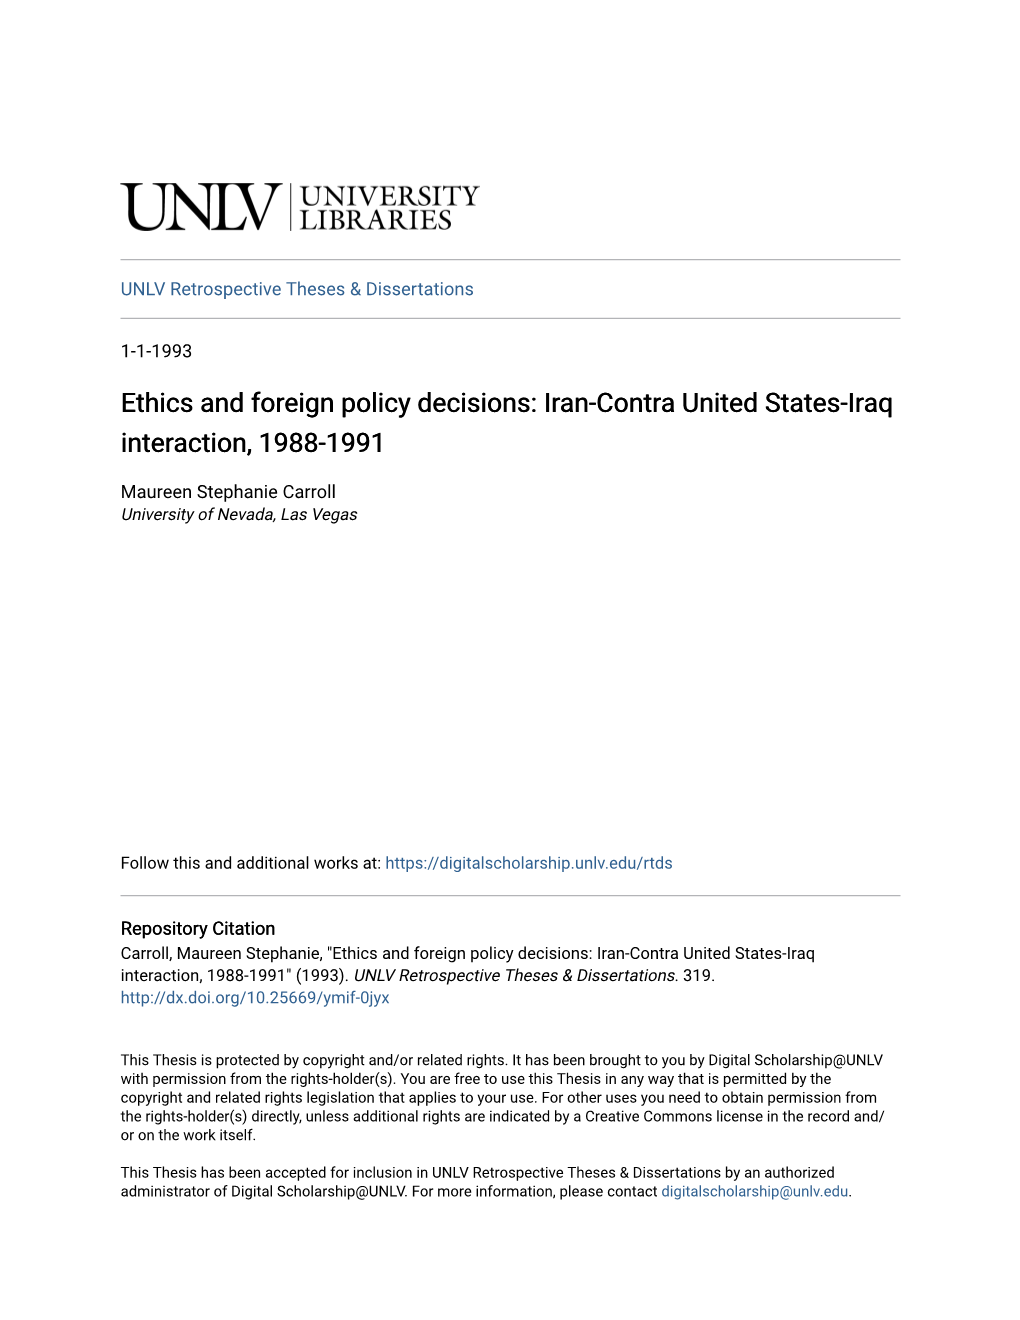 Ethics and Foreign Policy Decisions: Iran-Contra United States-Iraq Interaction, 1988-1991